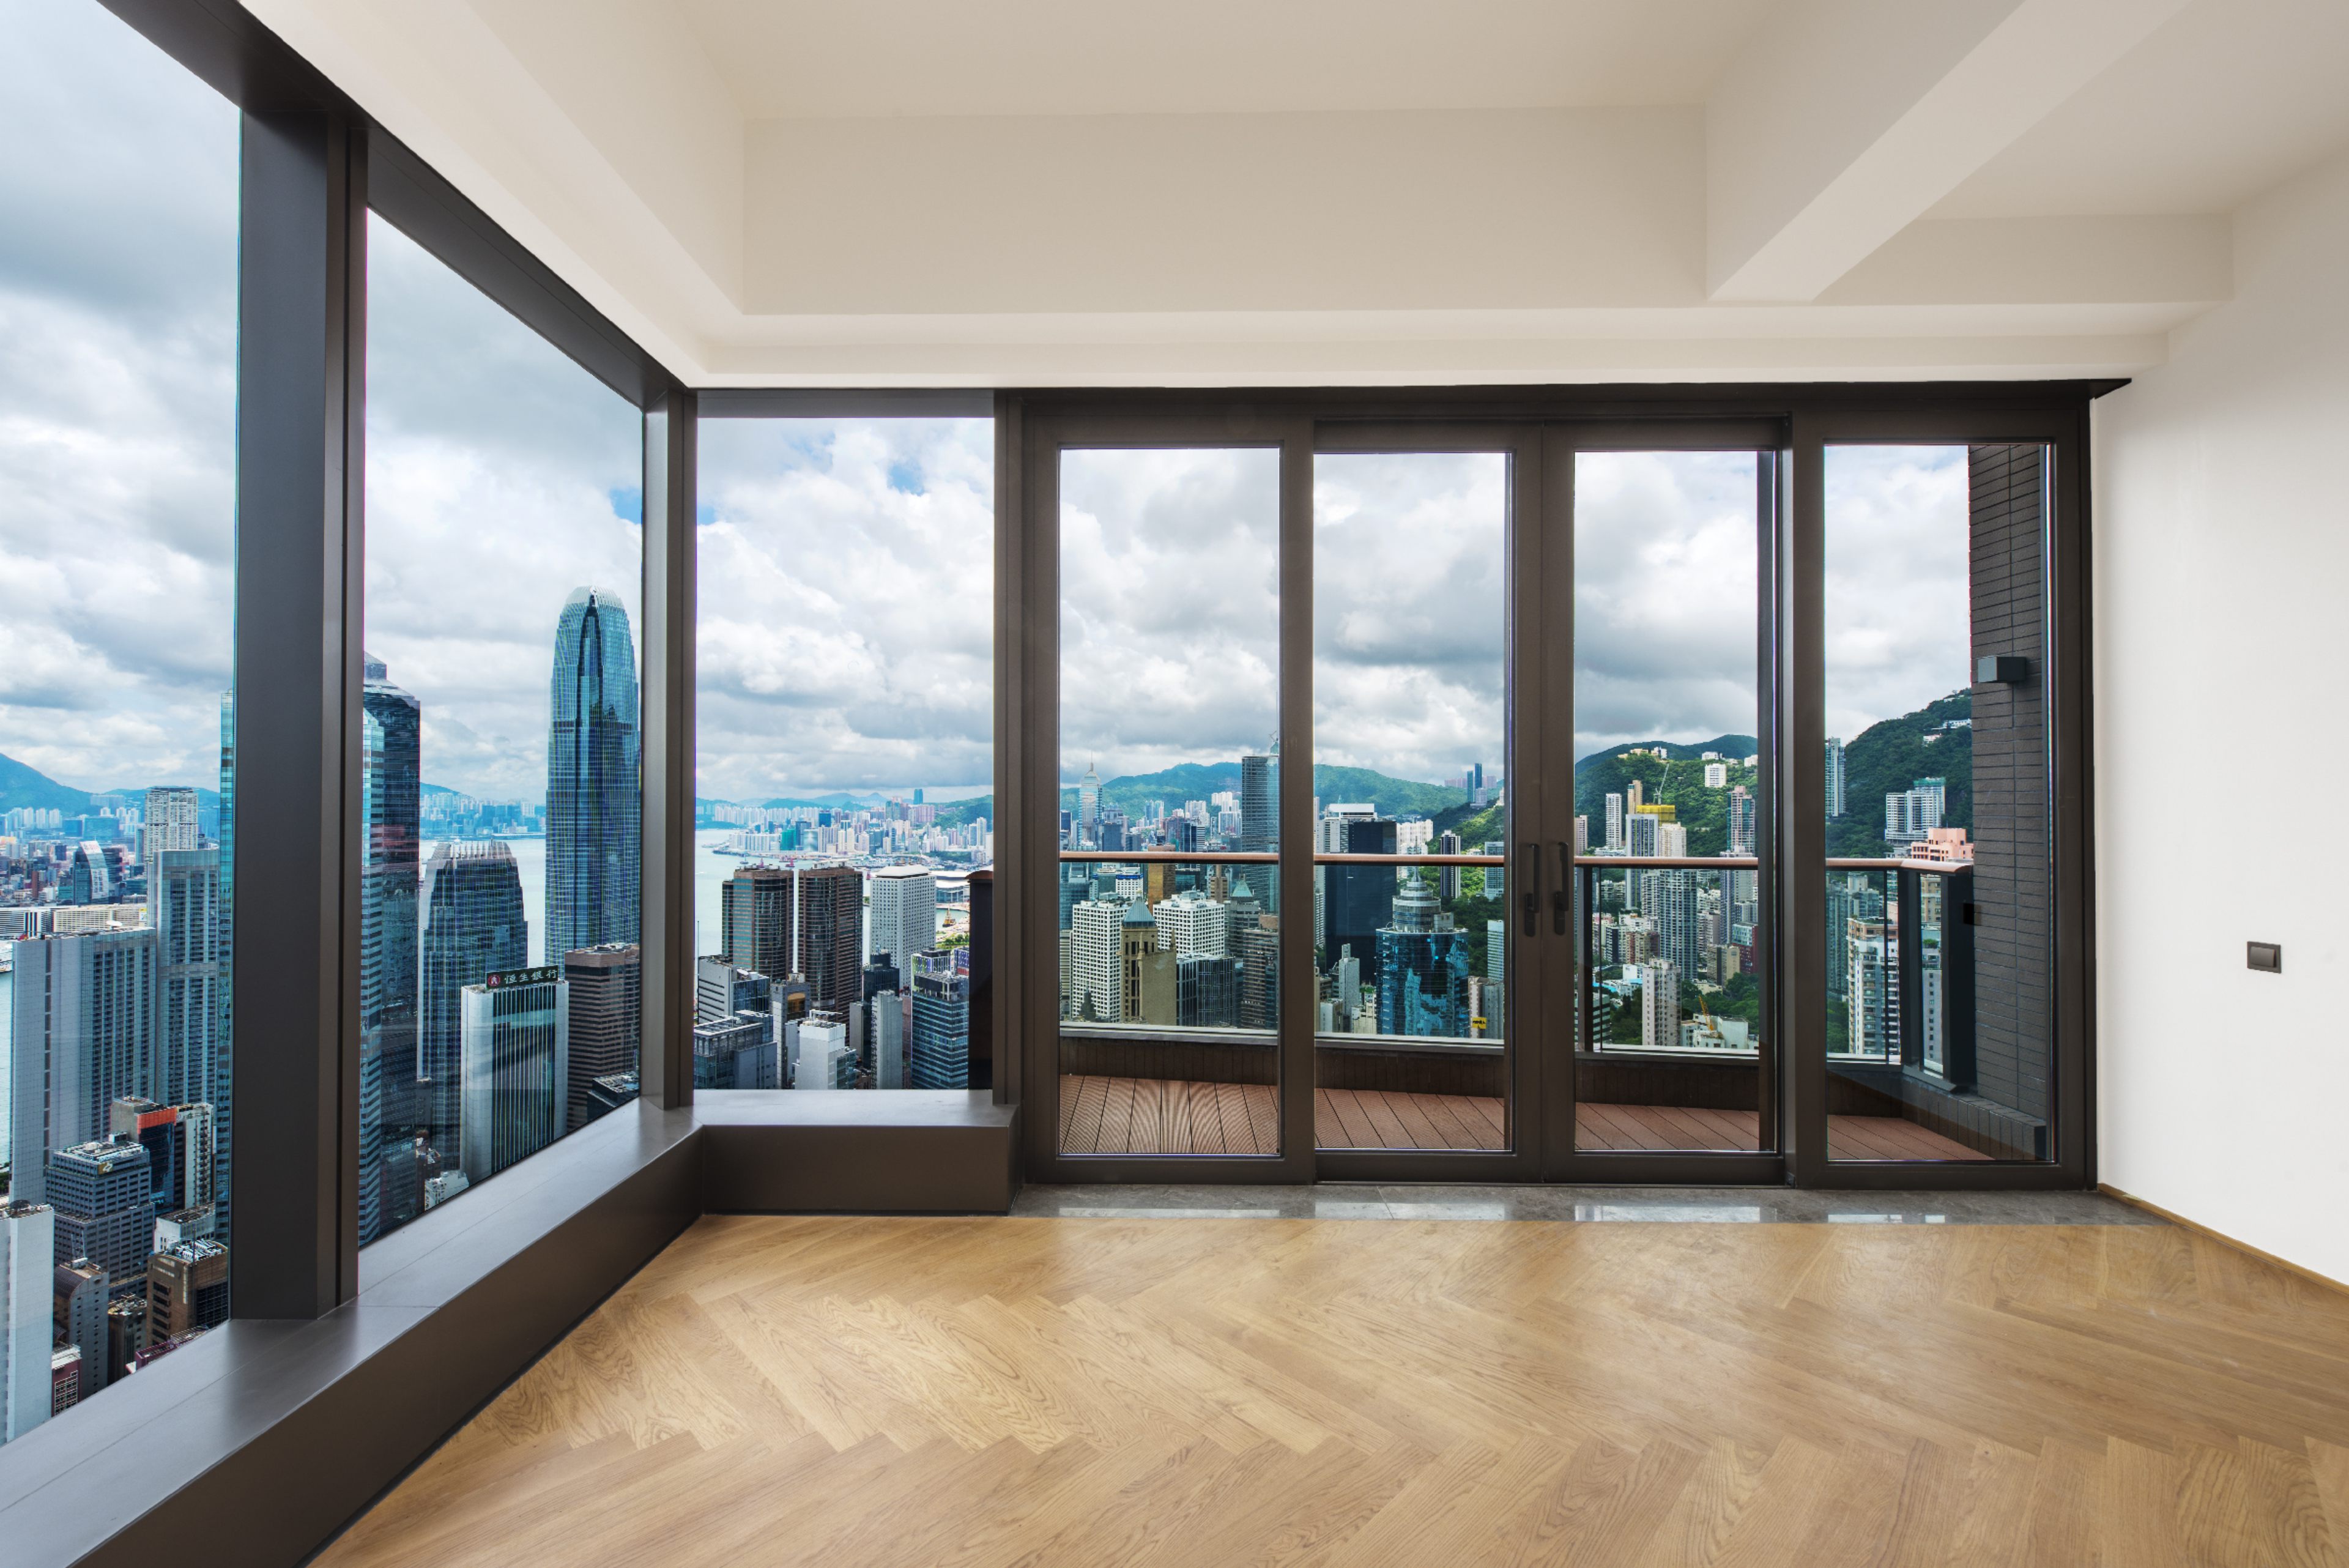 Take a peek at the most expensive apartments sold in Hong Kong this year